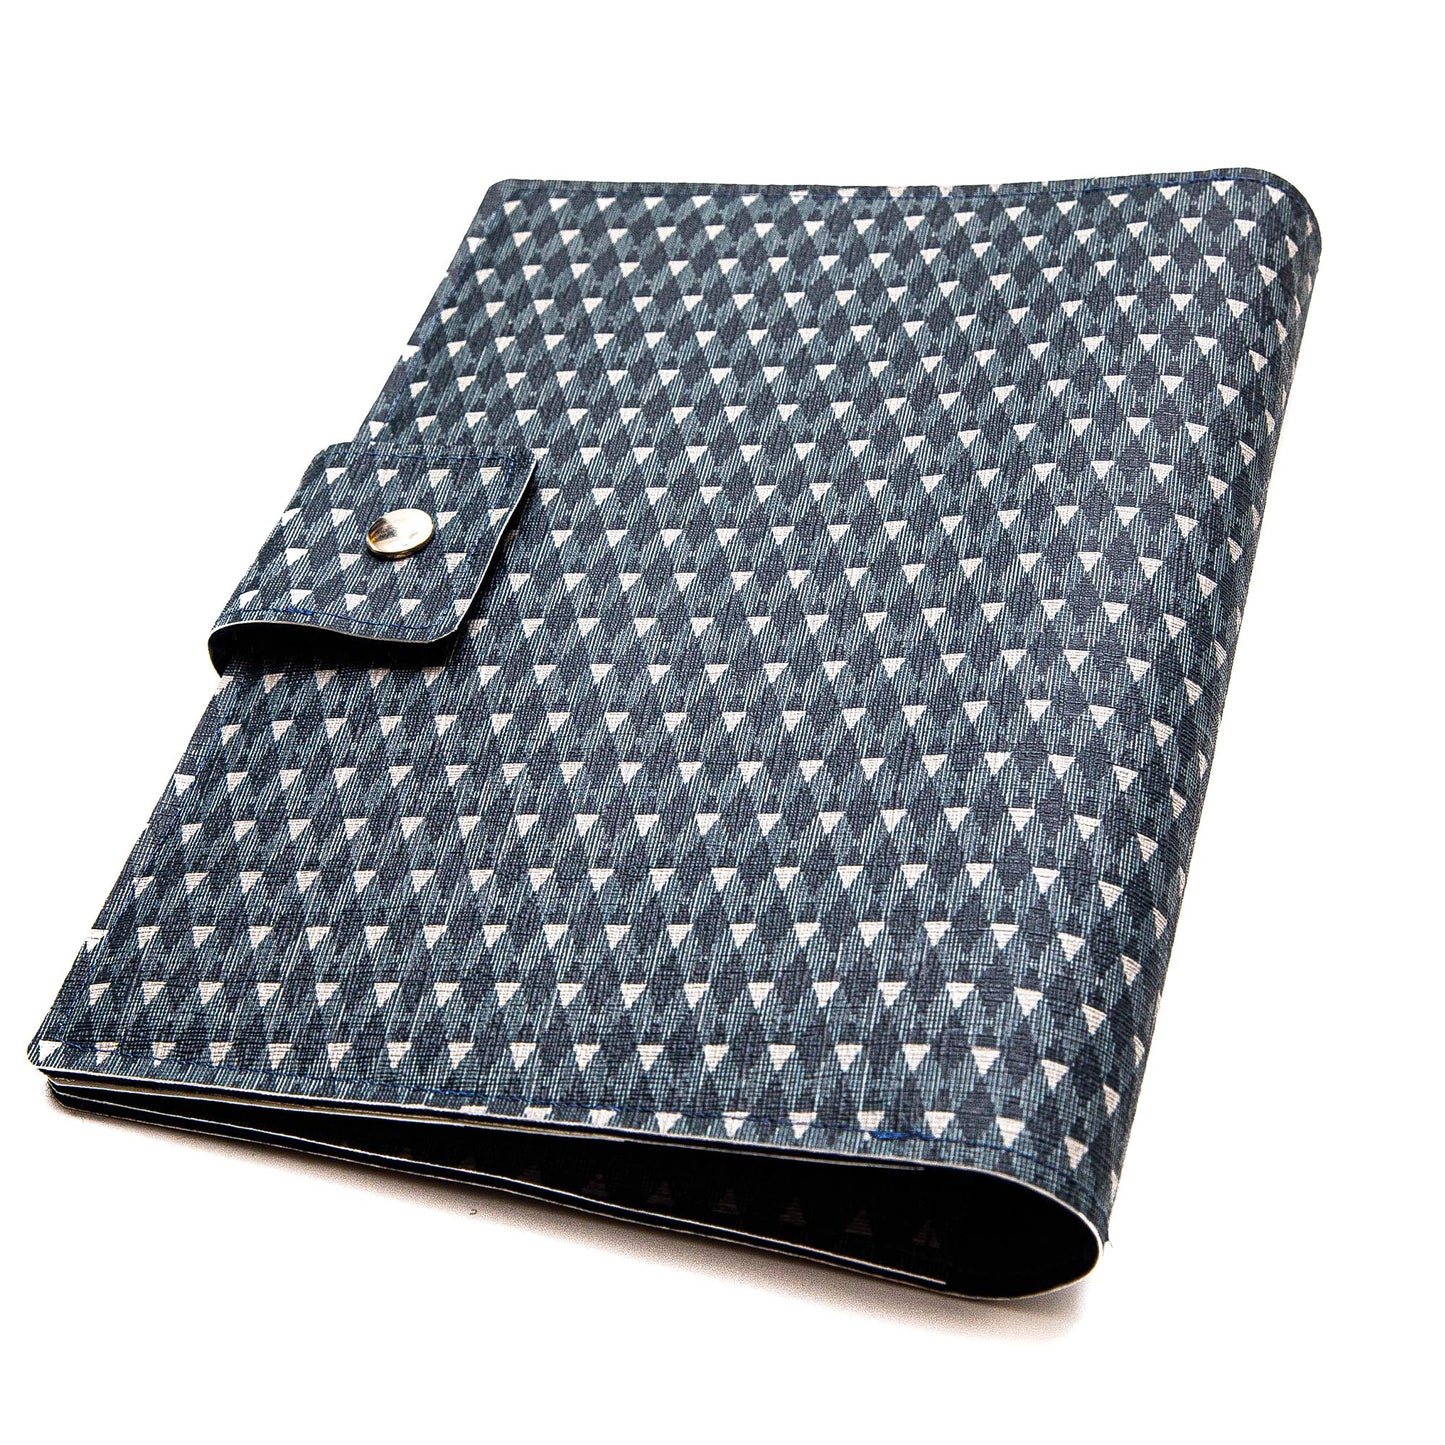 Handmade Folio Cover for iPad/Pro/Air - Blue & Grey Triangle Pattern Faux Leather